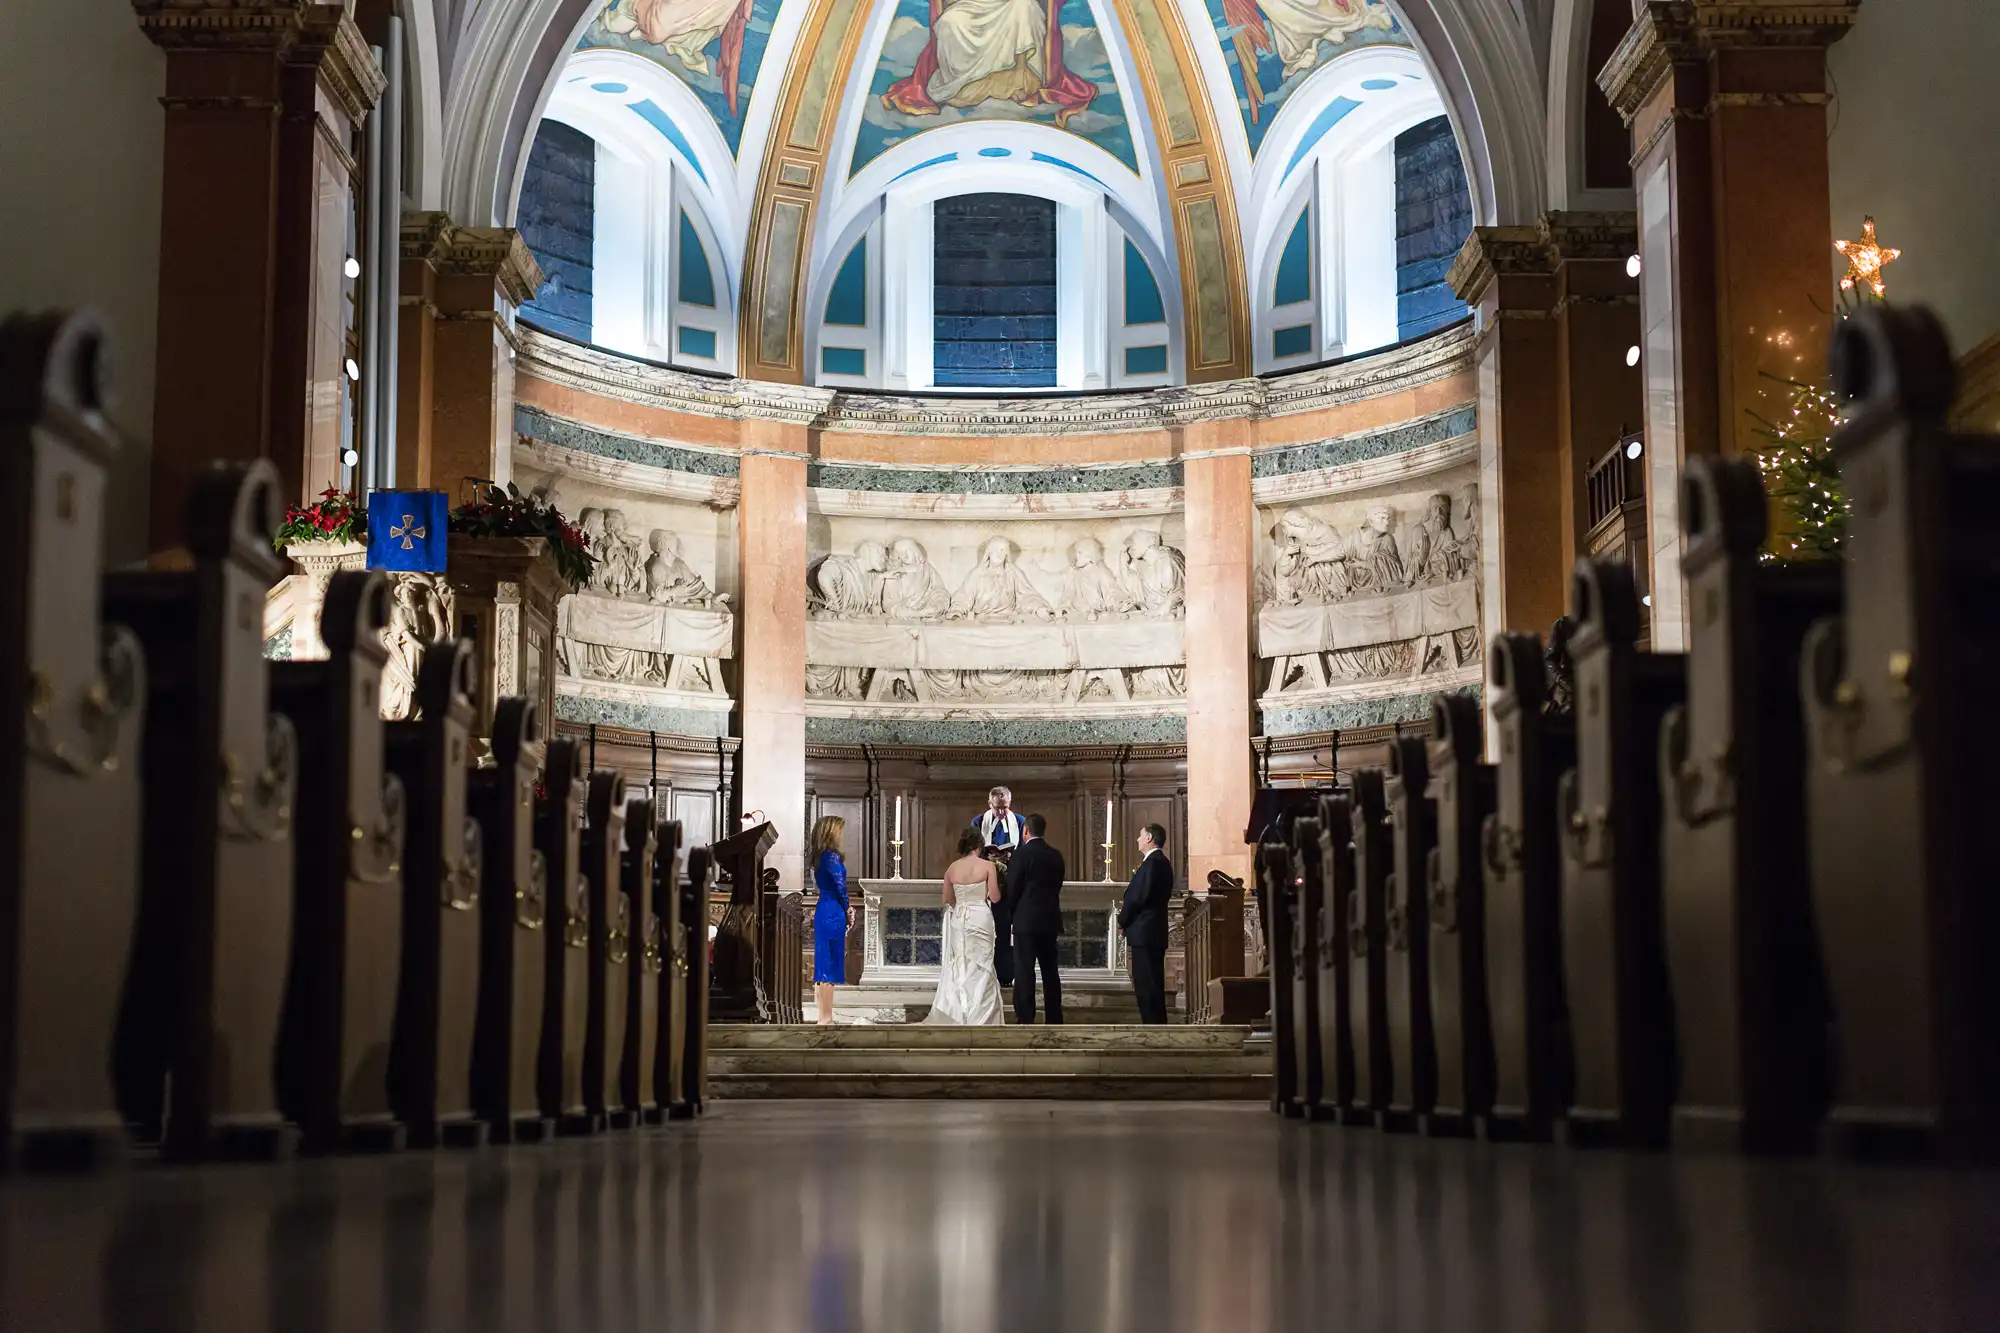 A wedding ceremony inside a church with guests seated along the aisle leading to a couple standing before an officiant under a detailed, arched altar.